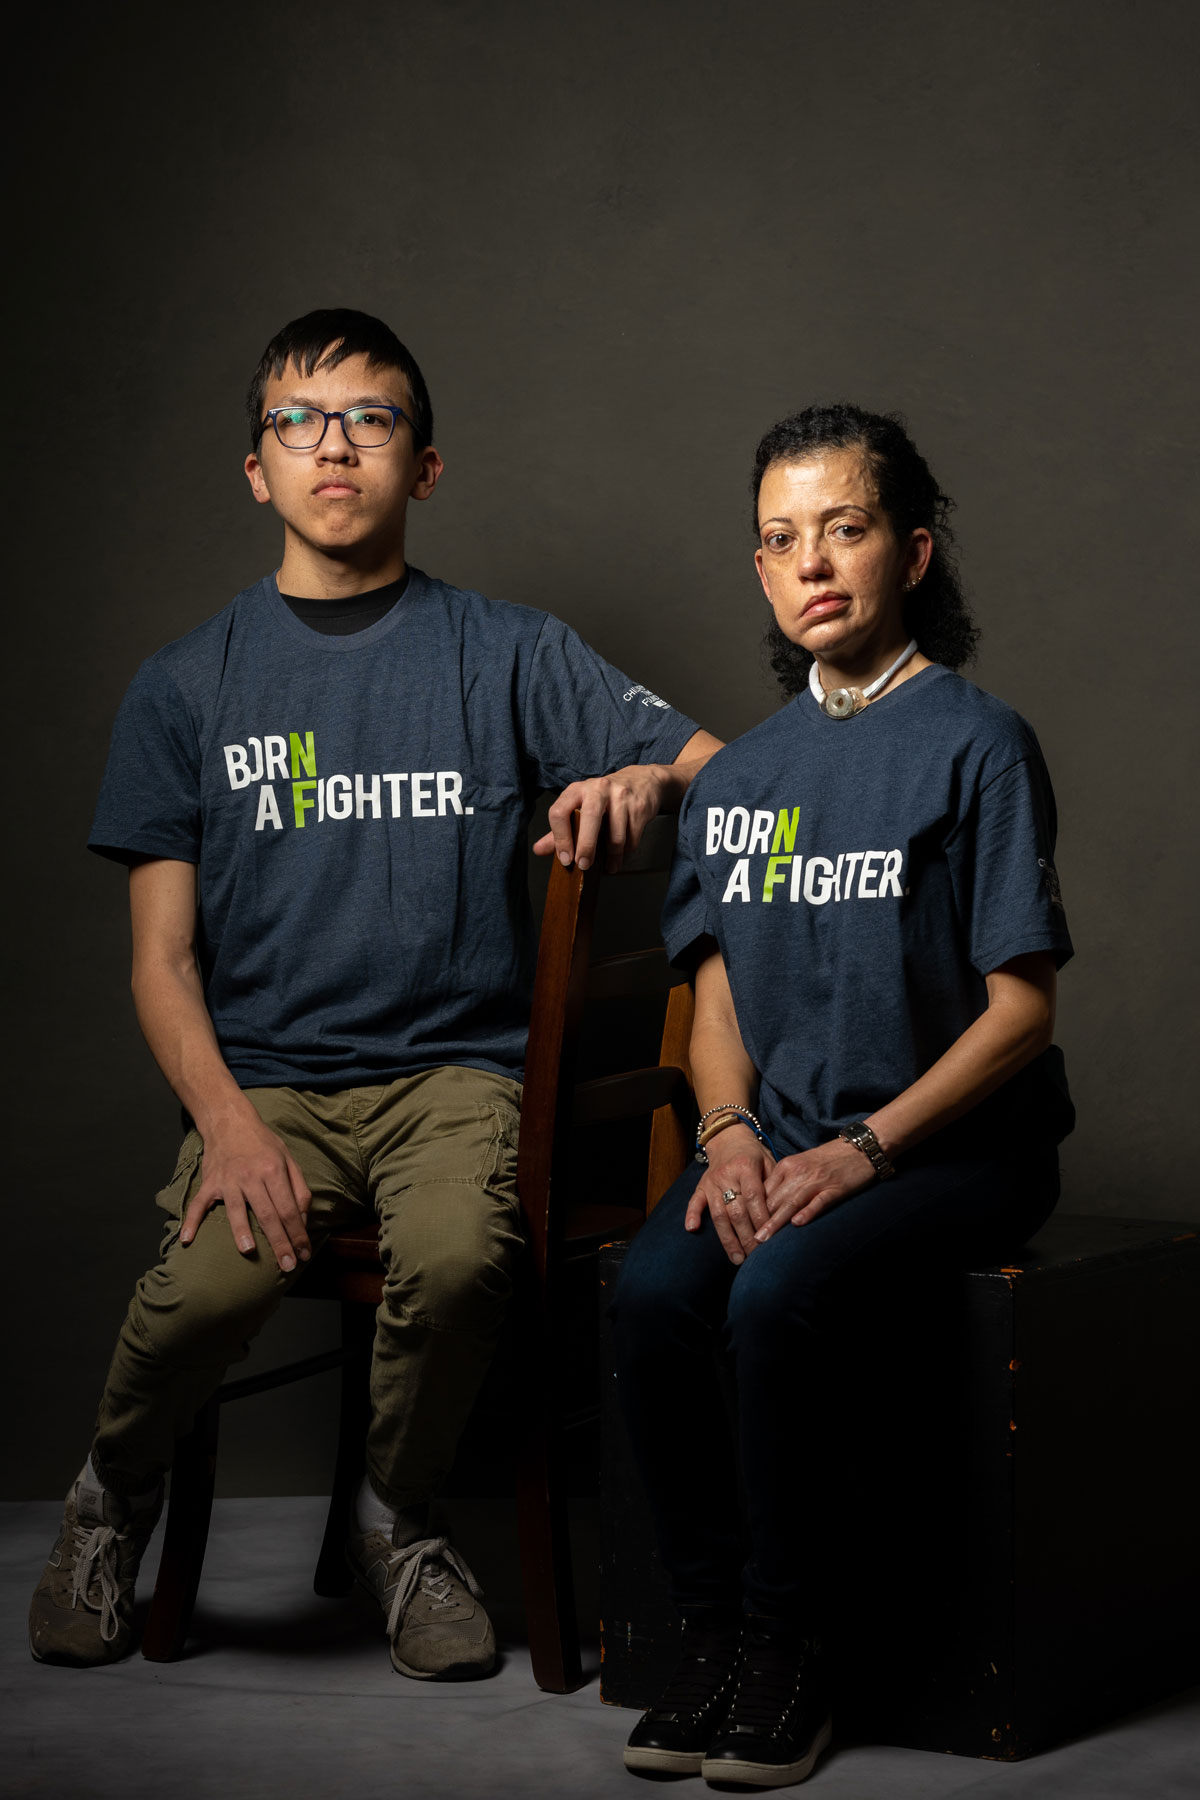 man and woman sitting wearing Born a Fighter shirts